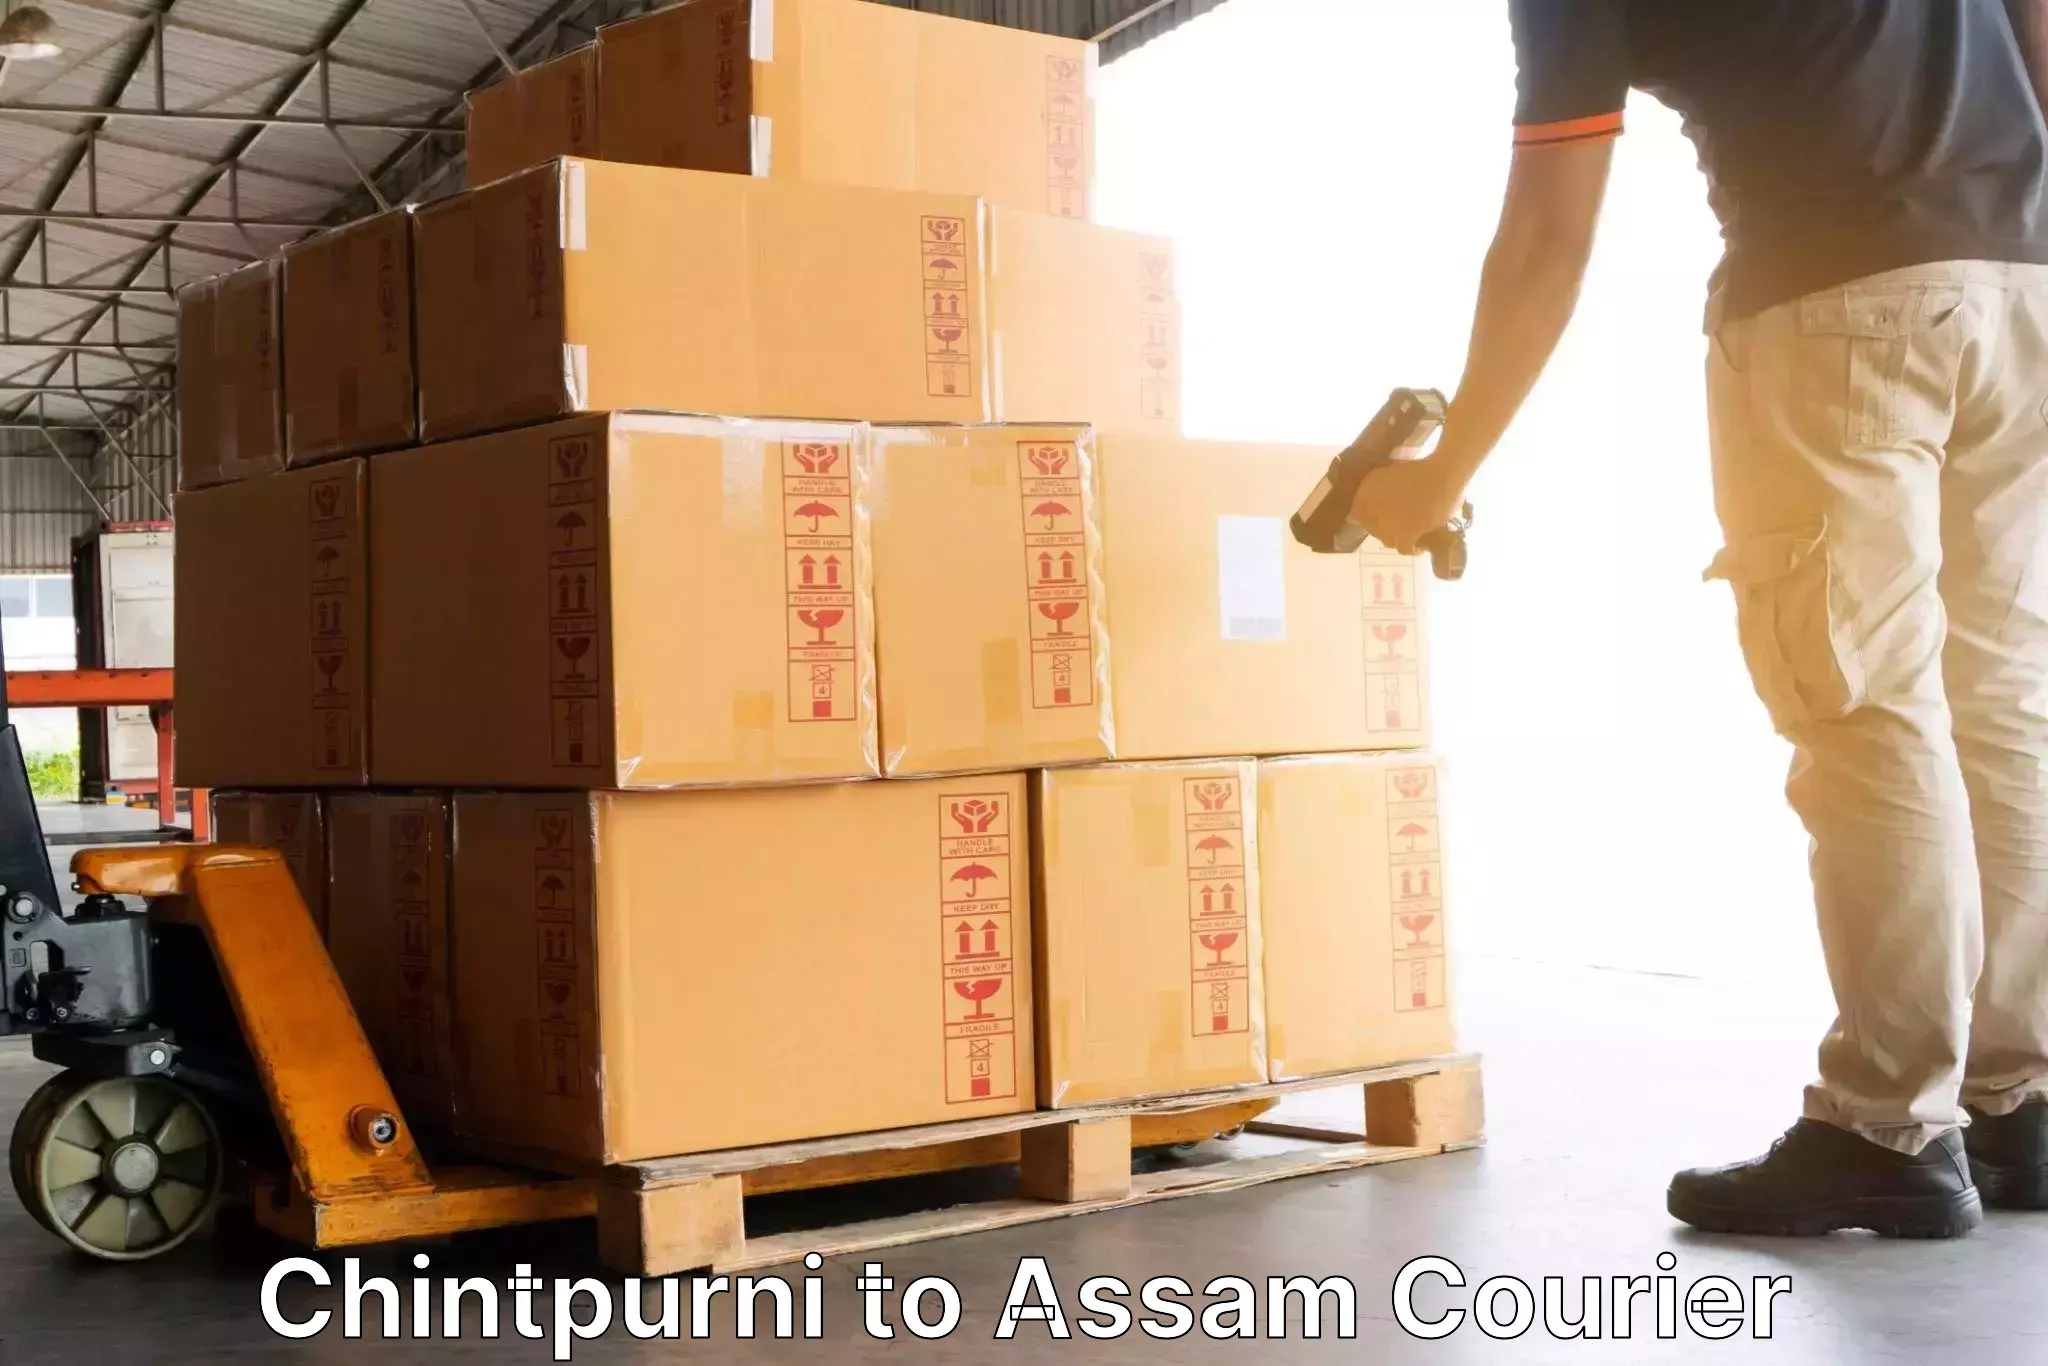 User-friendly courier app Chintpurni to Lakhipur